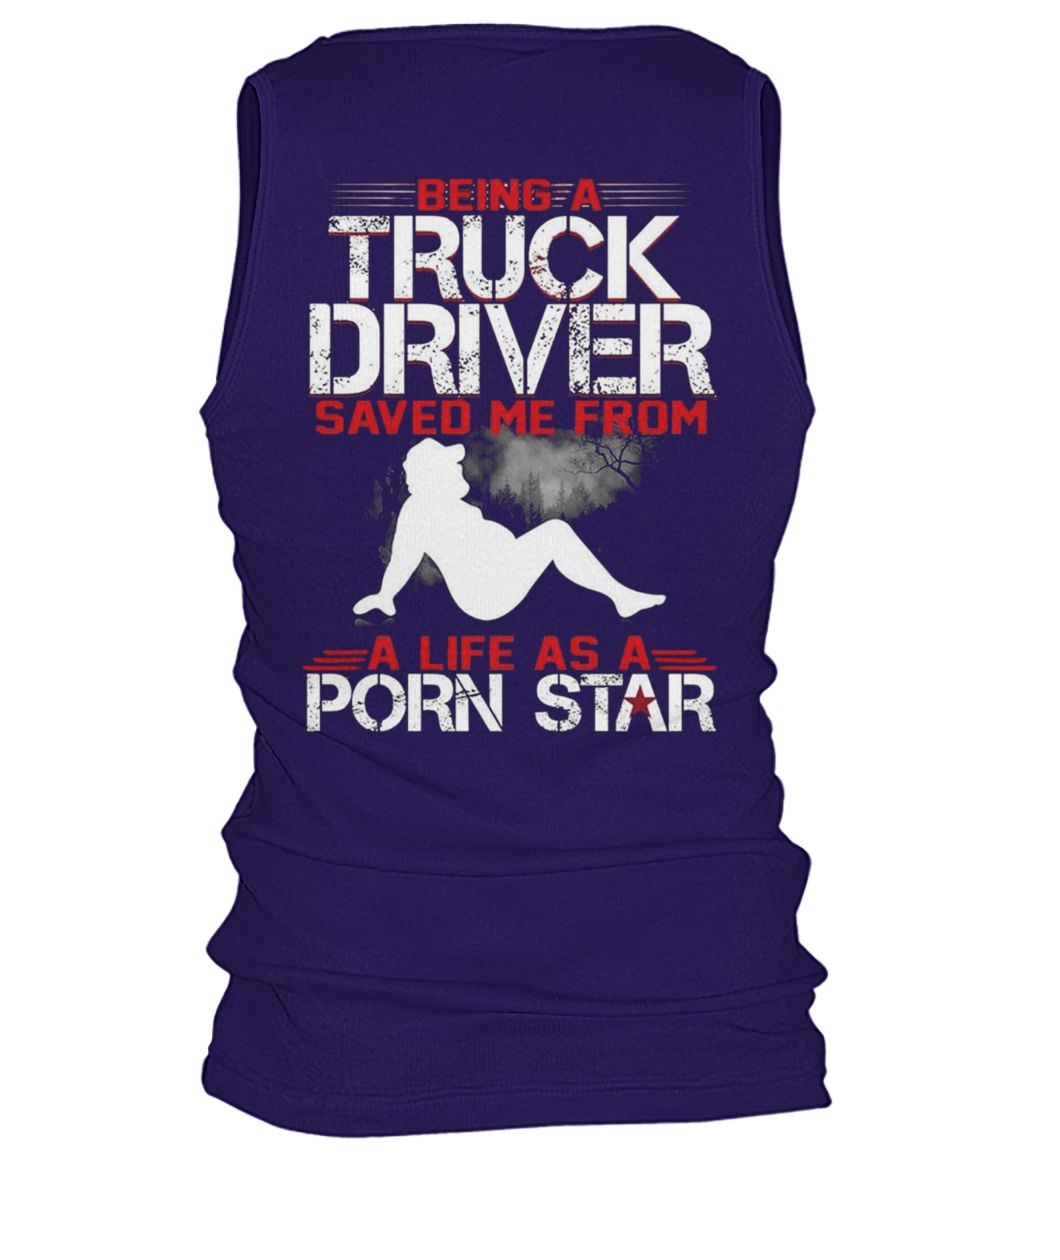 Being a truck driver save me from a life as a porn star men's tank top